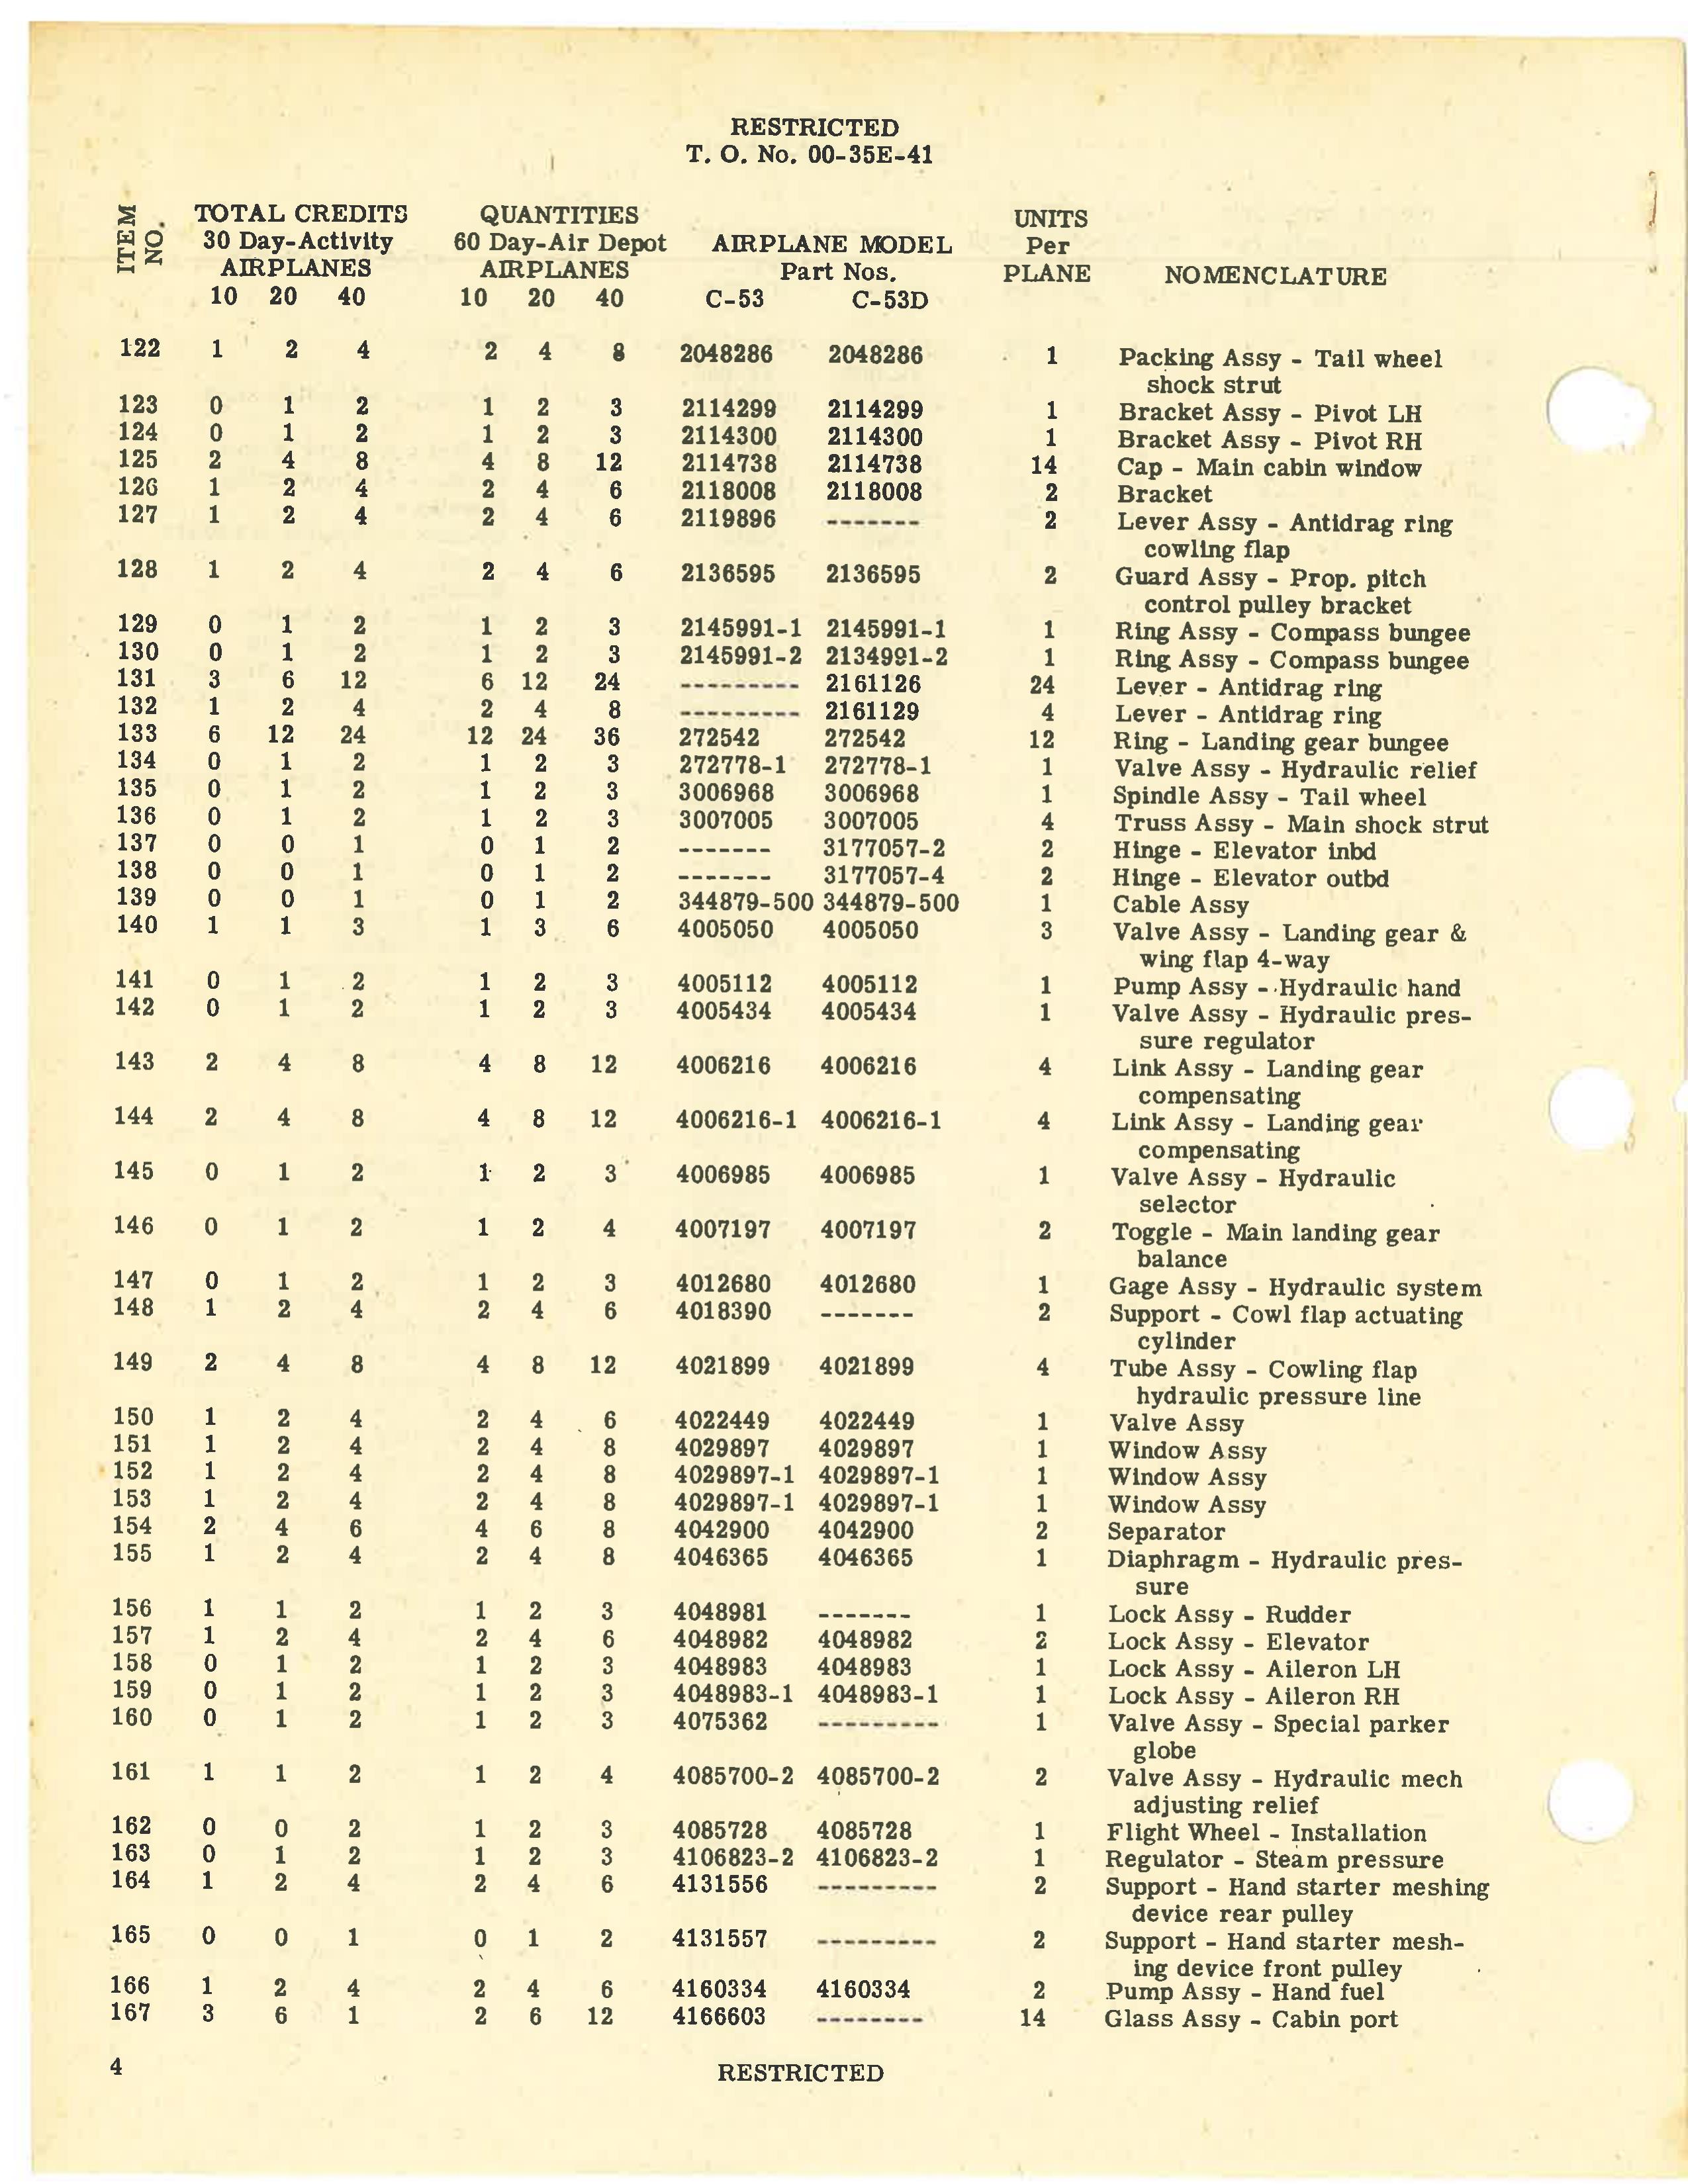 Sample page 6 from AirCorps Library document: Table of Credit Aircraft Maintenance Parts for C-53 and C-53D